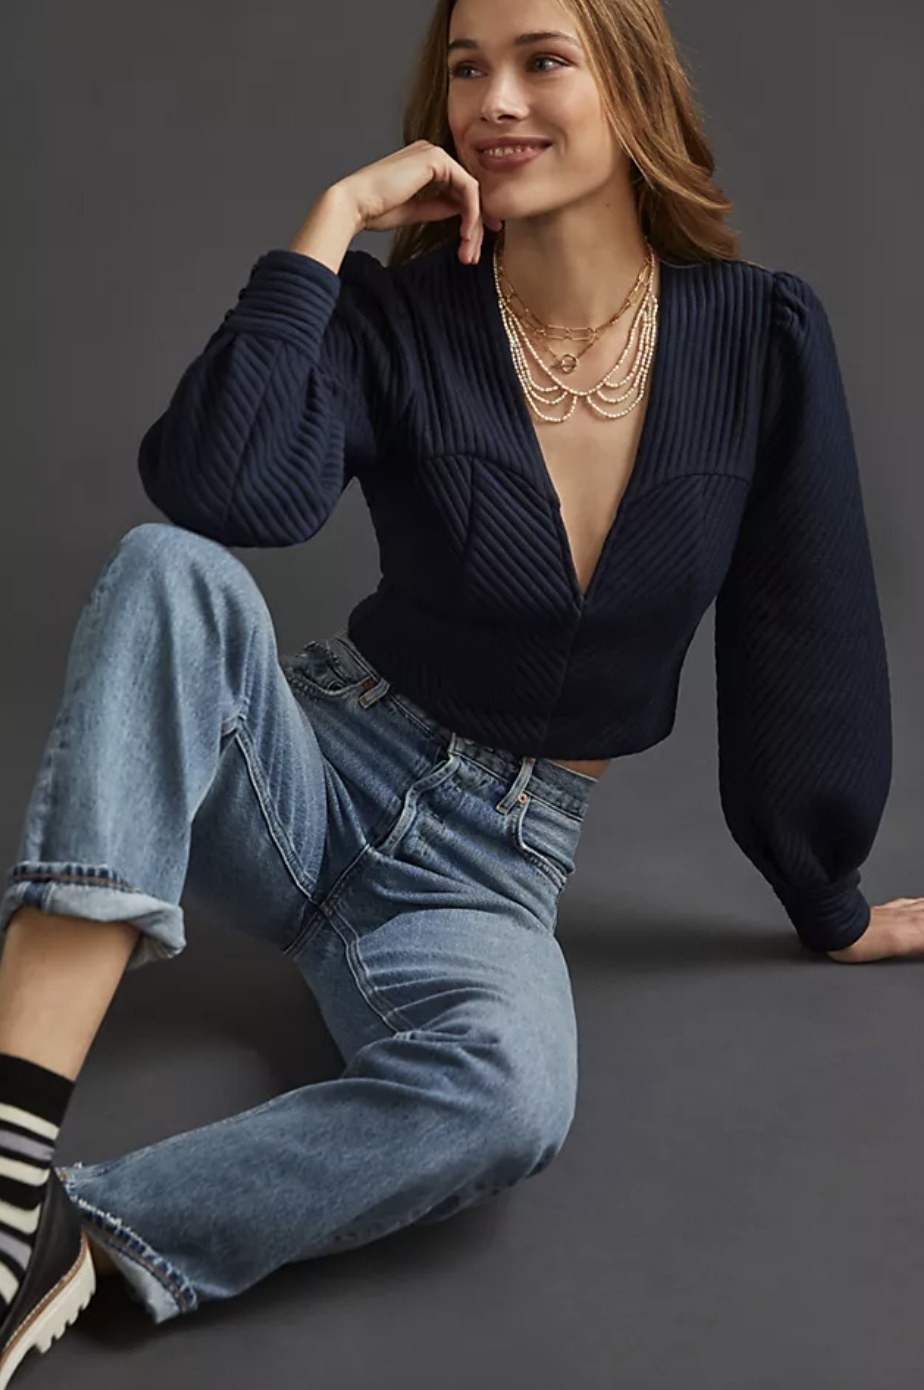 An adult wears a dark blue pullover with ribbed detailing paired with jeans a nd hold jewelry